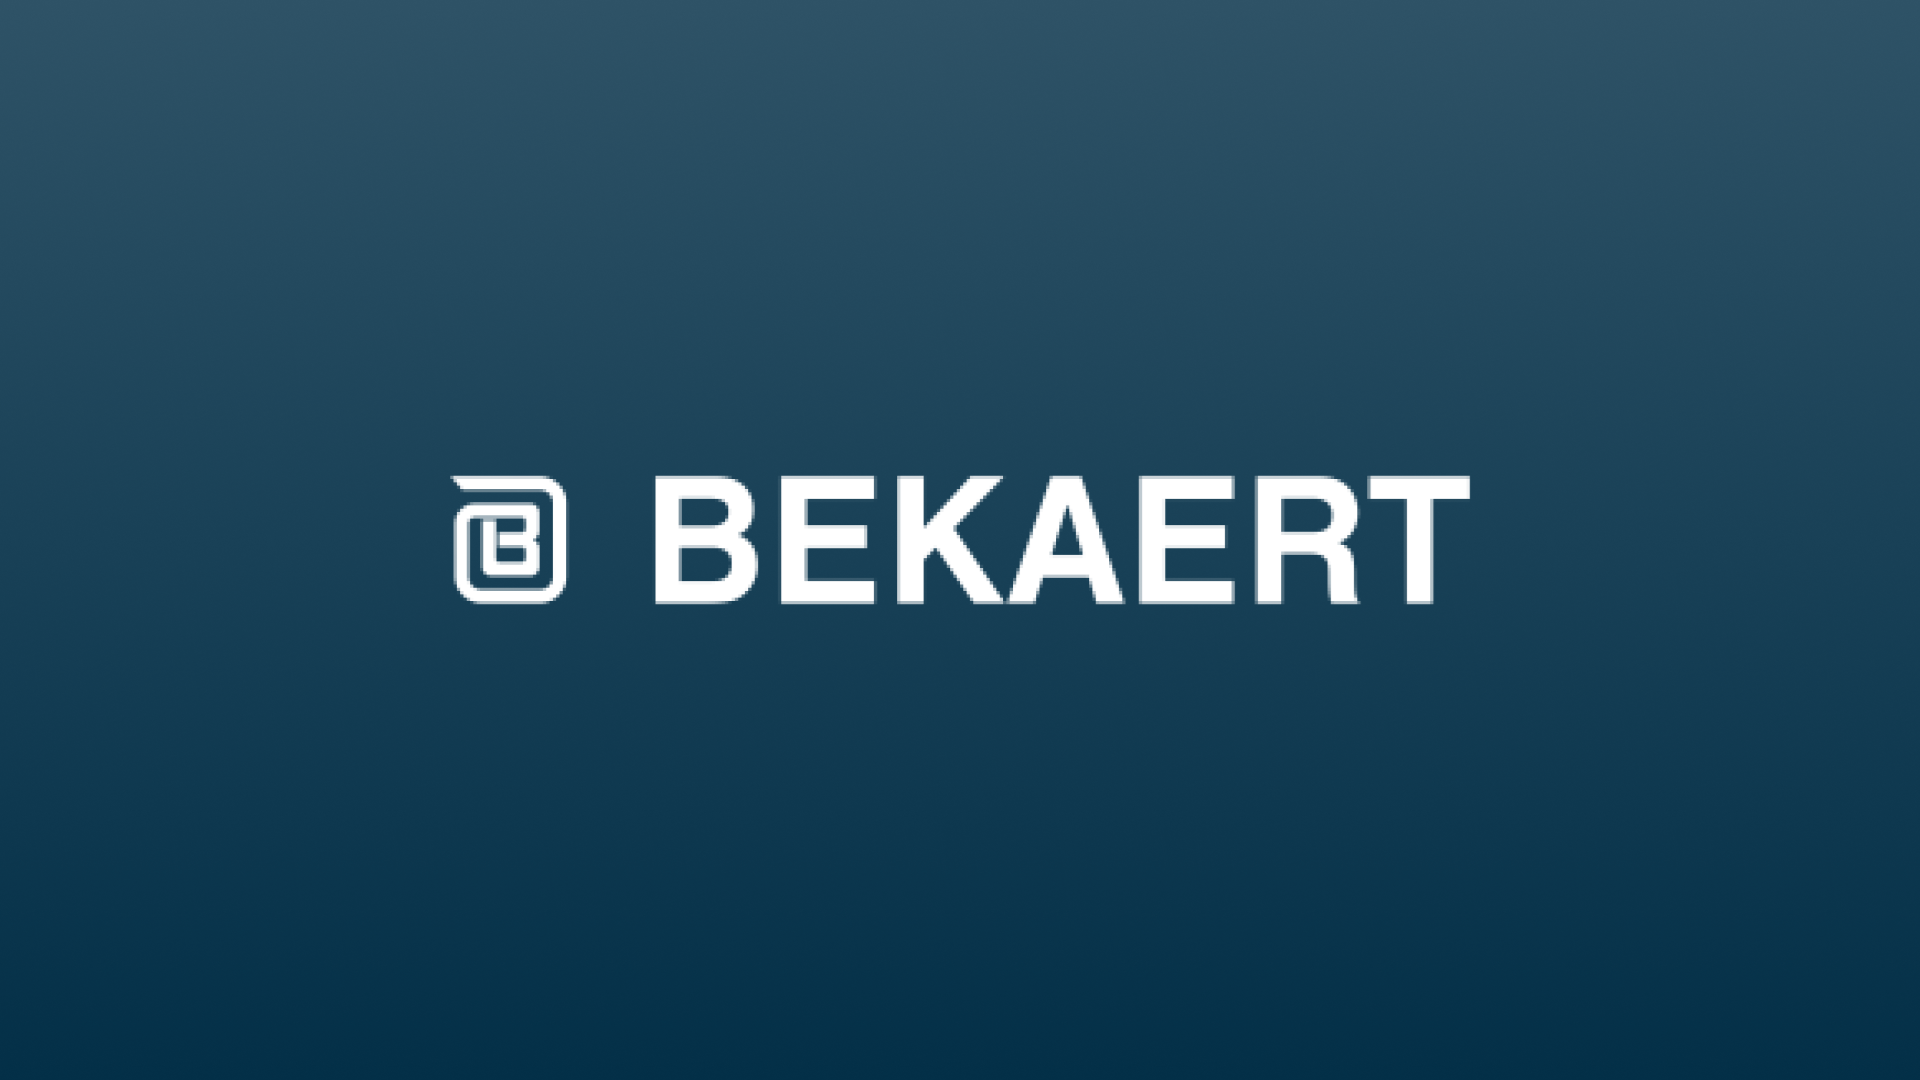 Bekaert receives approval for the sale of its steel wire businesses in Chile and Peru